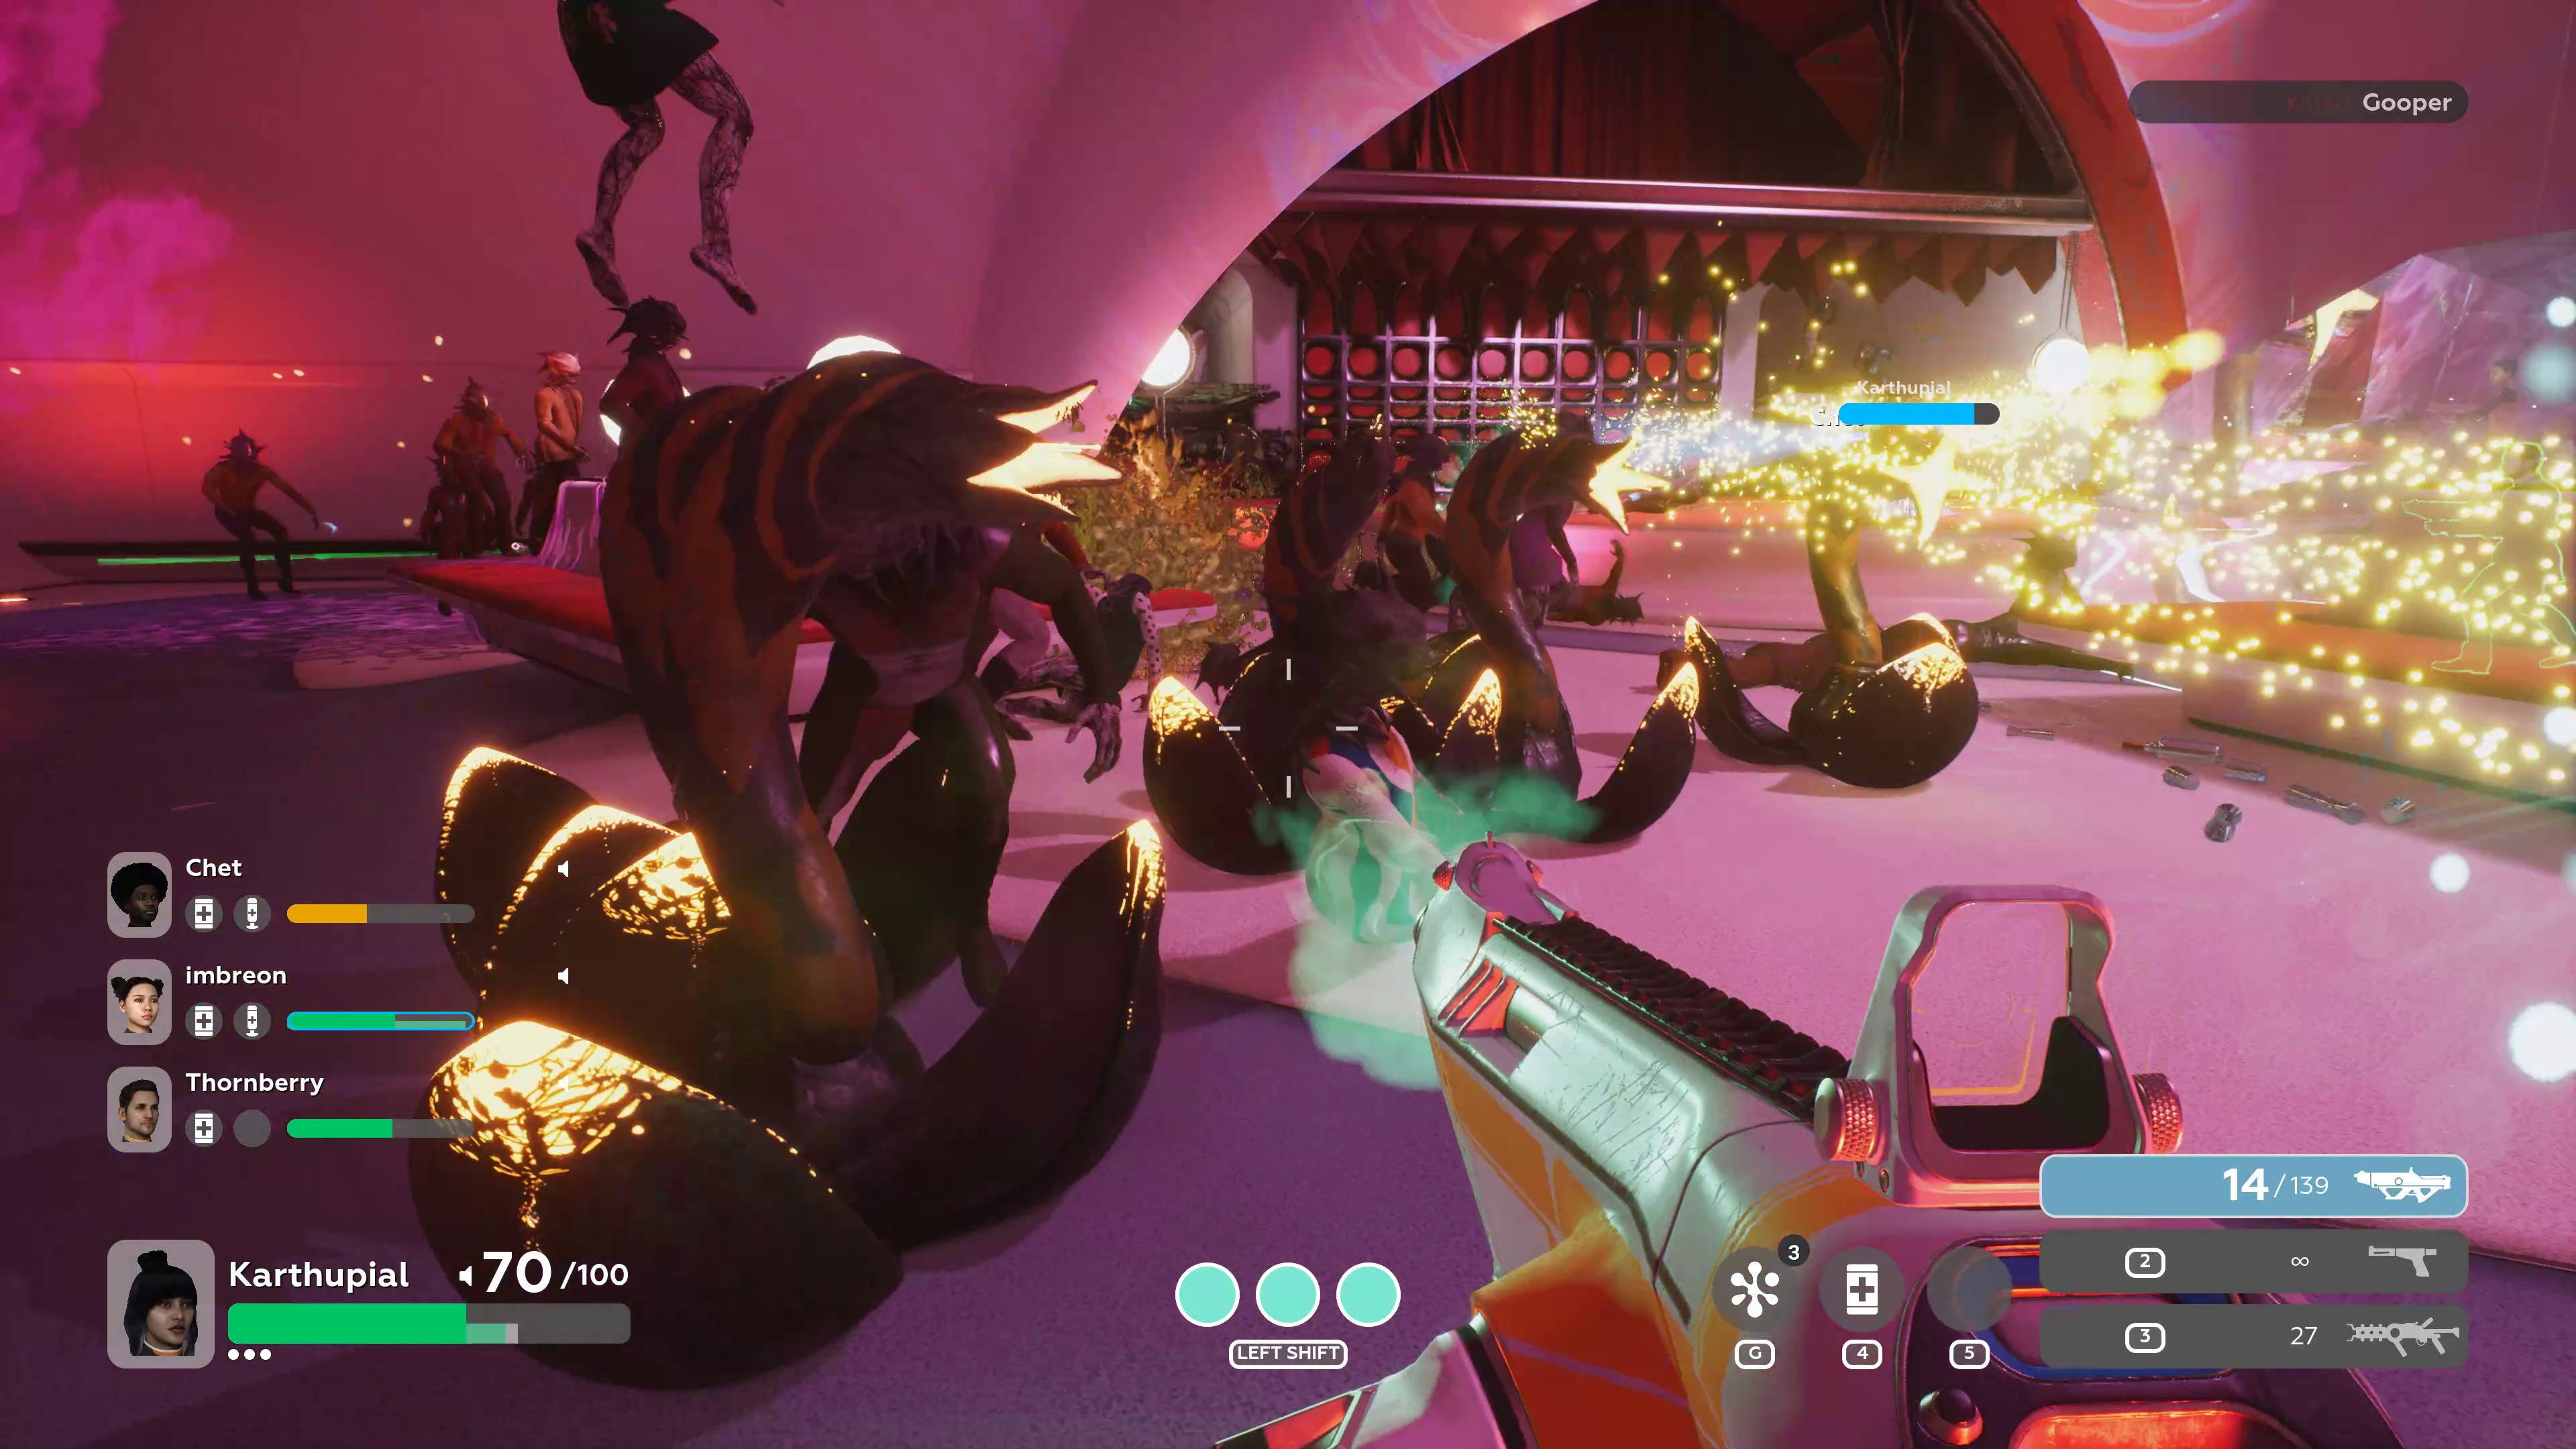 Aliens pour into a disco battle event in The Anacrusis